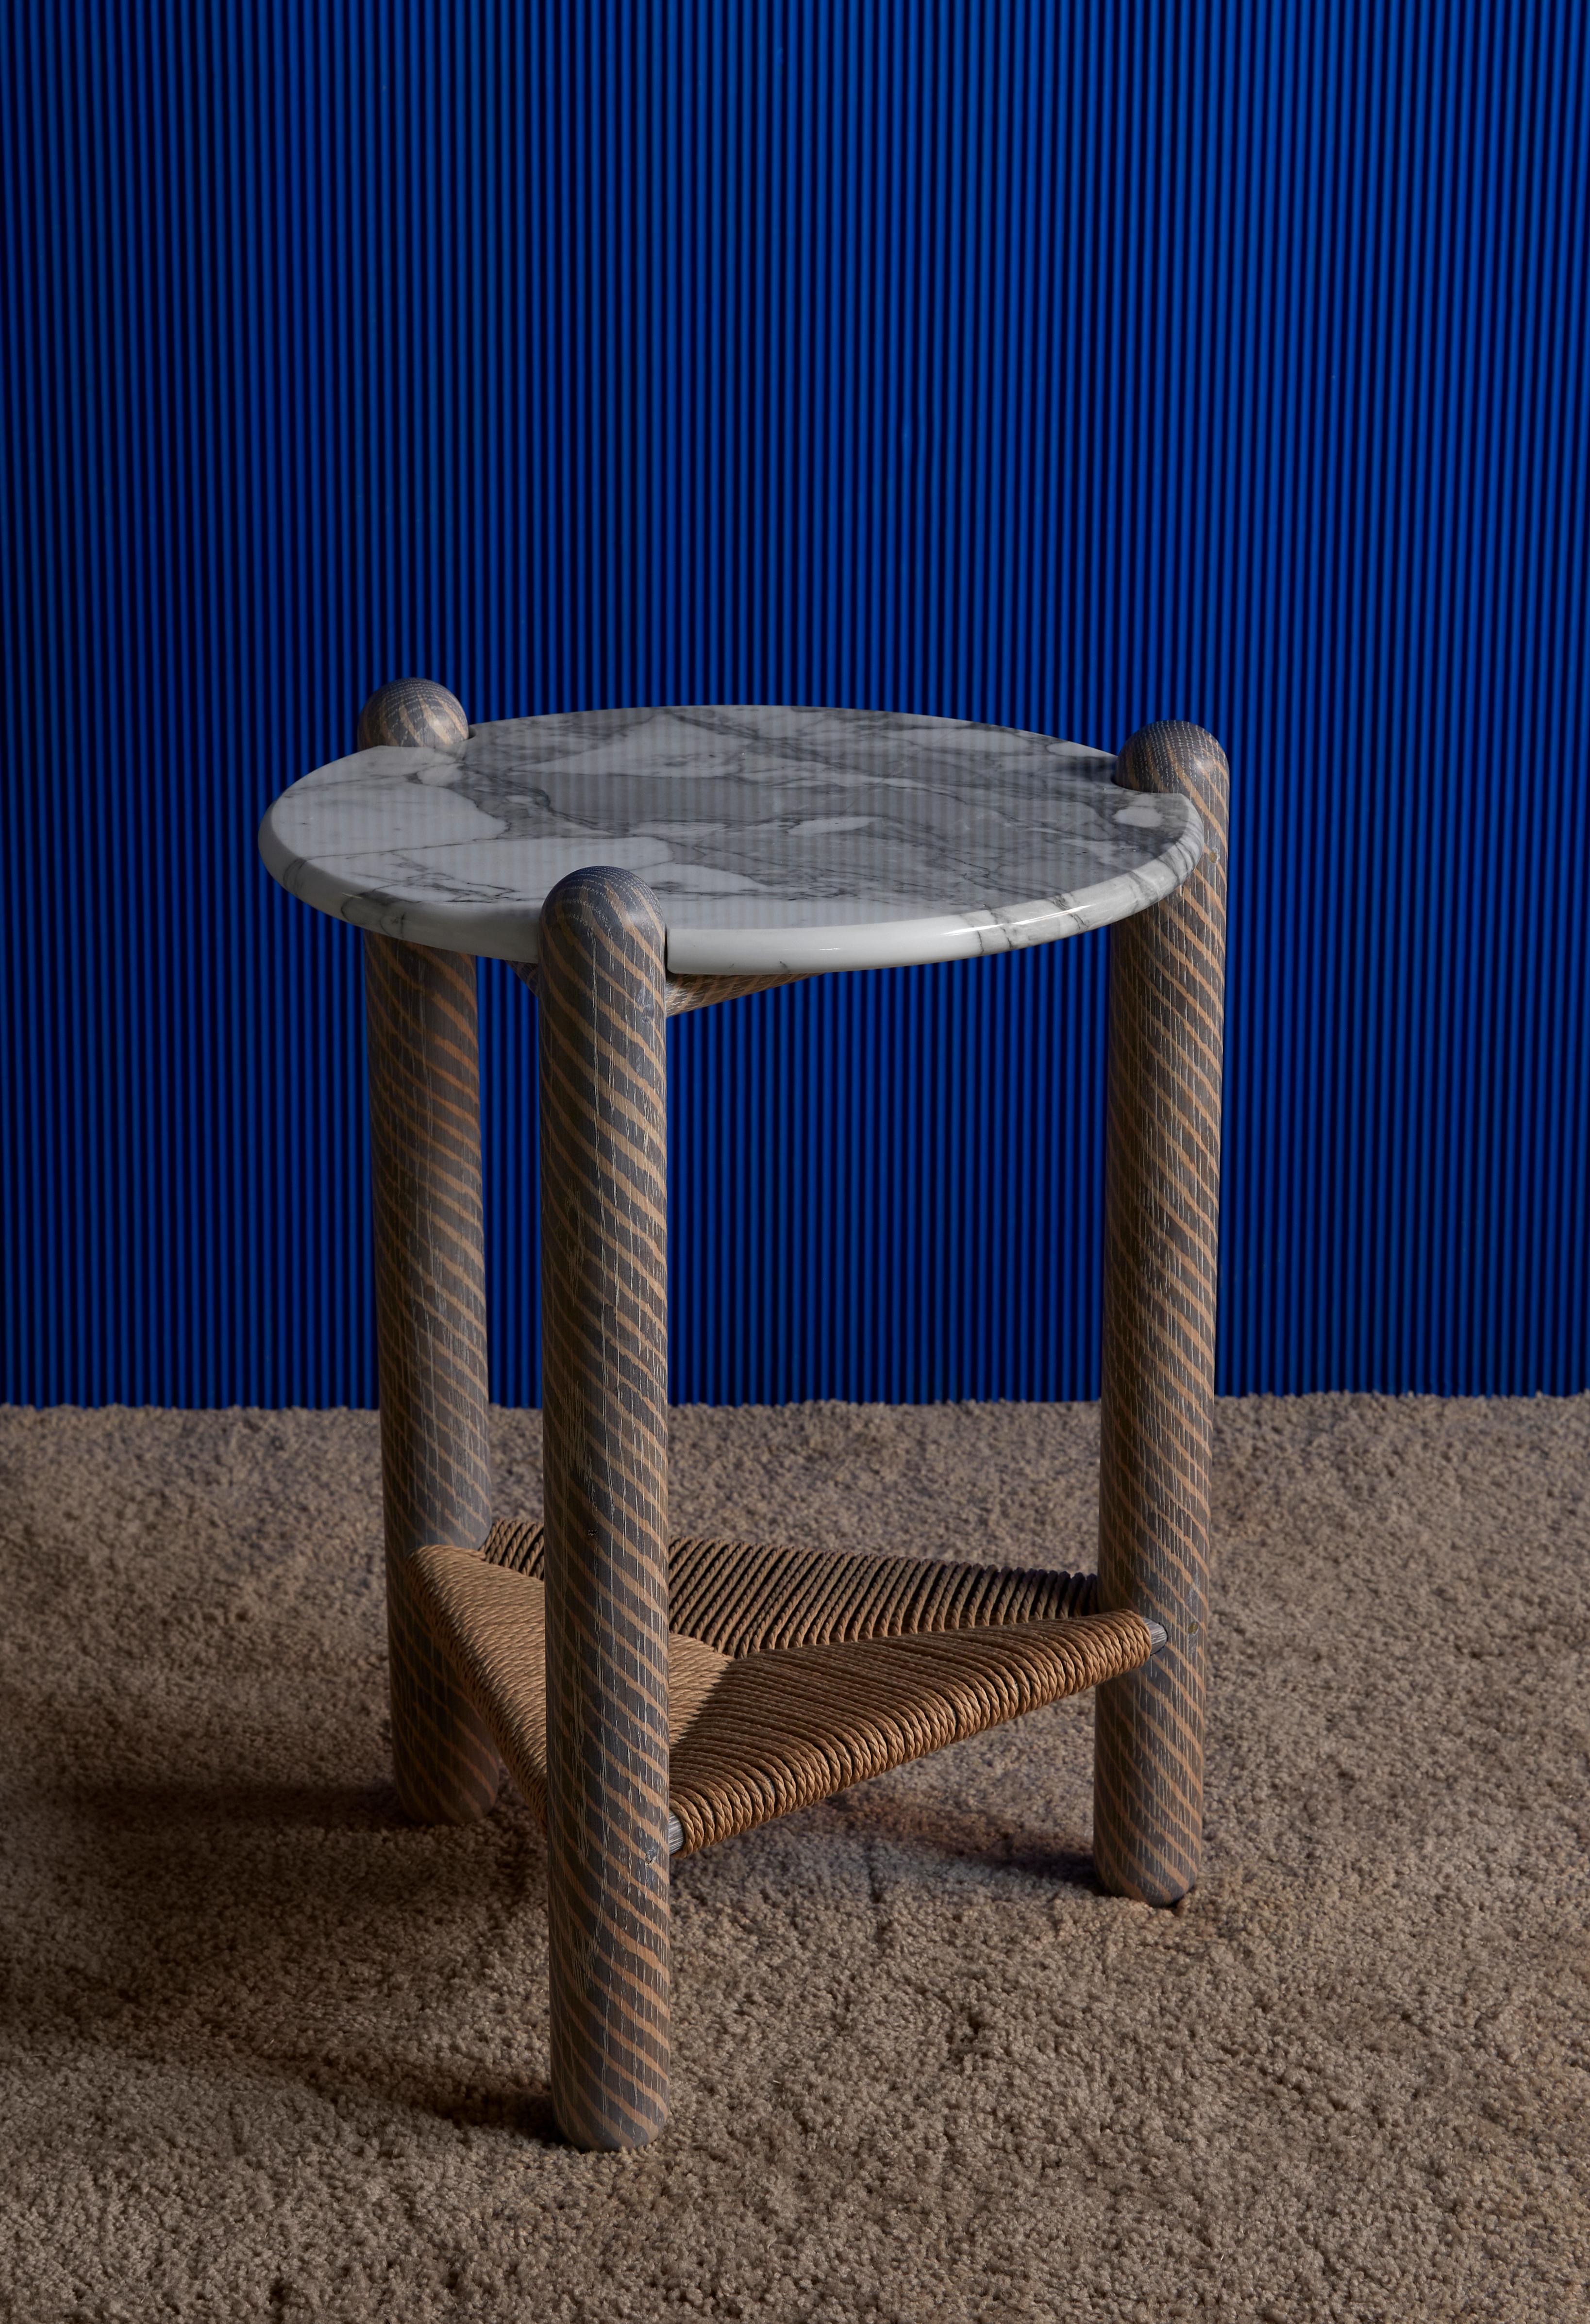 Captain's side table by Hamilton Holmes
Oxalino Collection 
2020
Dimensions: D 38.1 W 38.1 H 50.8 cm
Materials : White Oak, Calcatta marble, Natural Danish Cord, Oxidized Treatment

These solid Oak three legged tables feature handwoven Danish